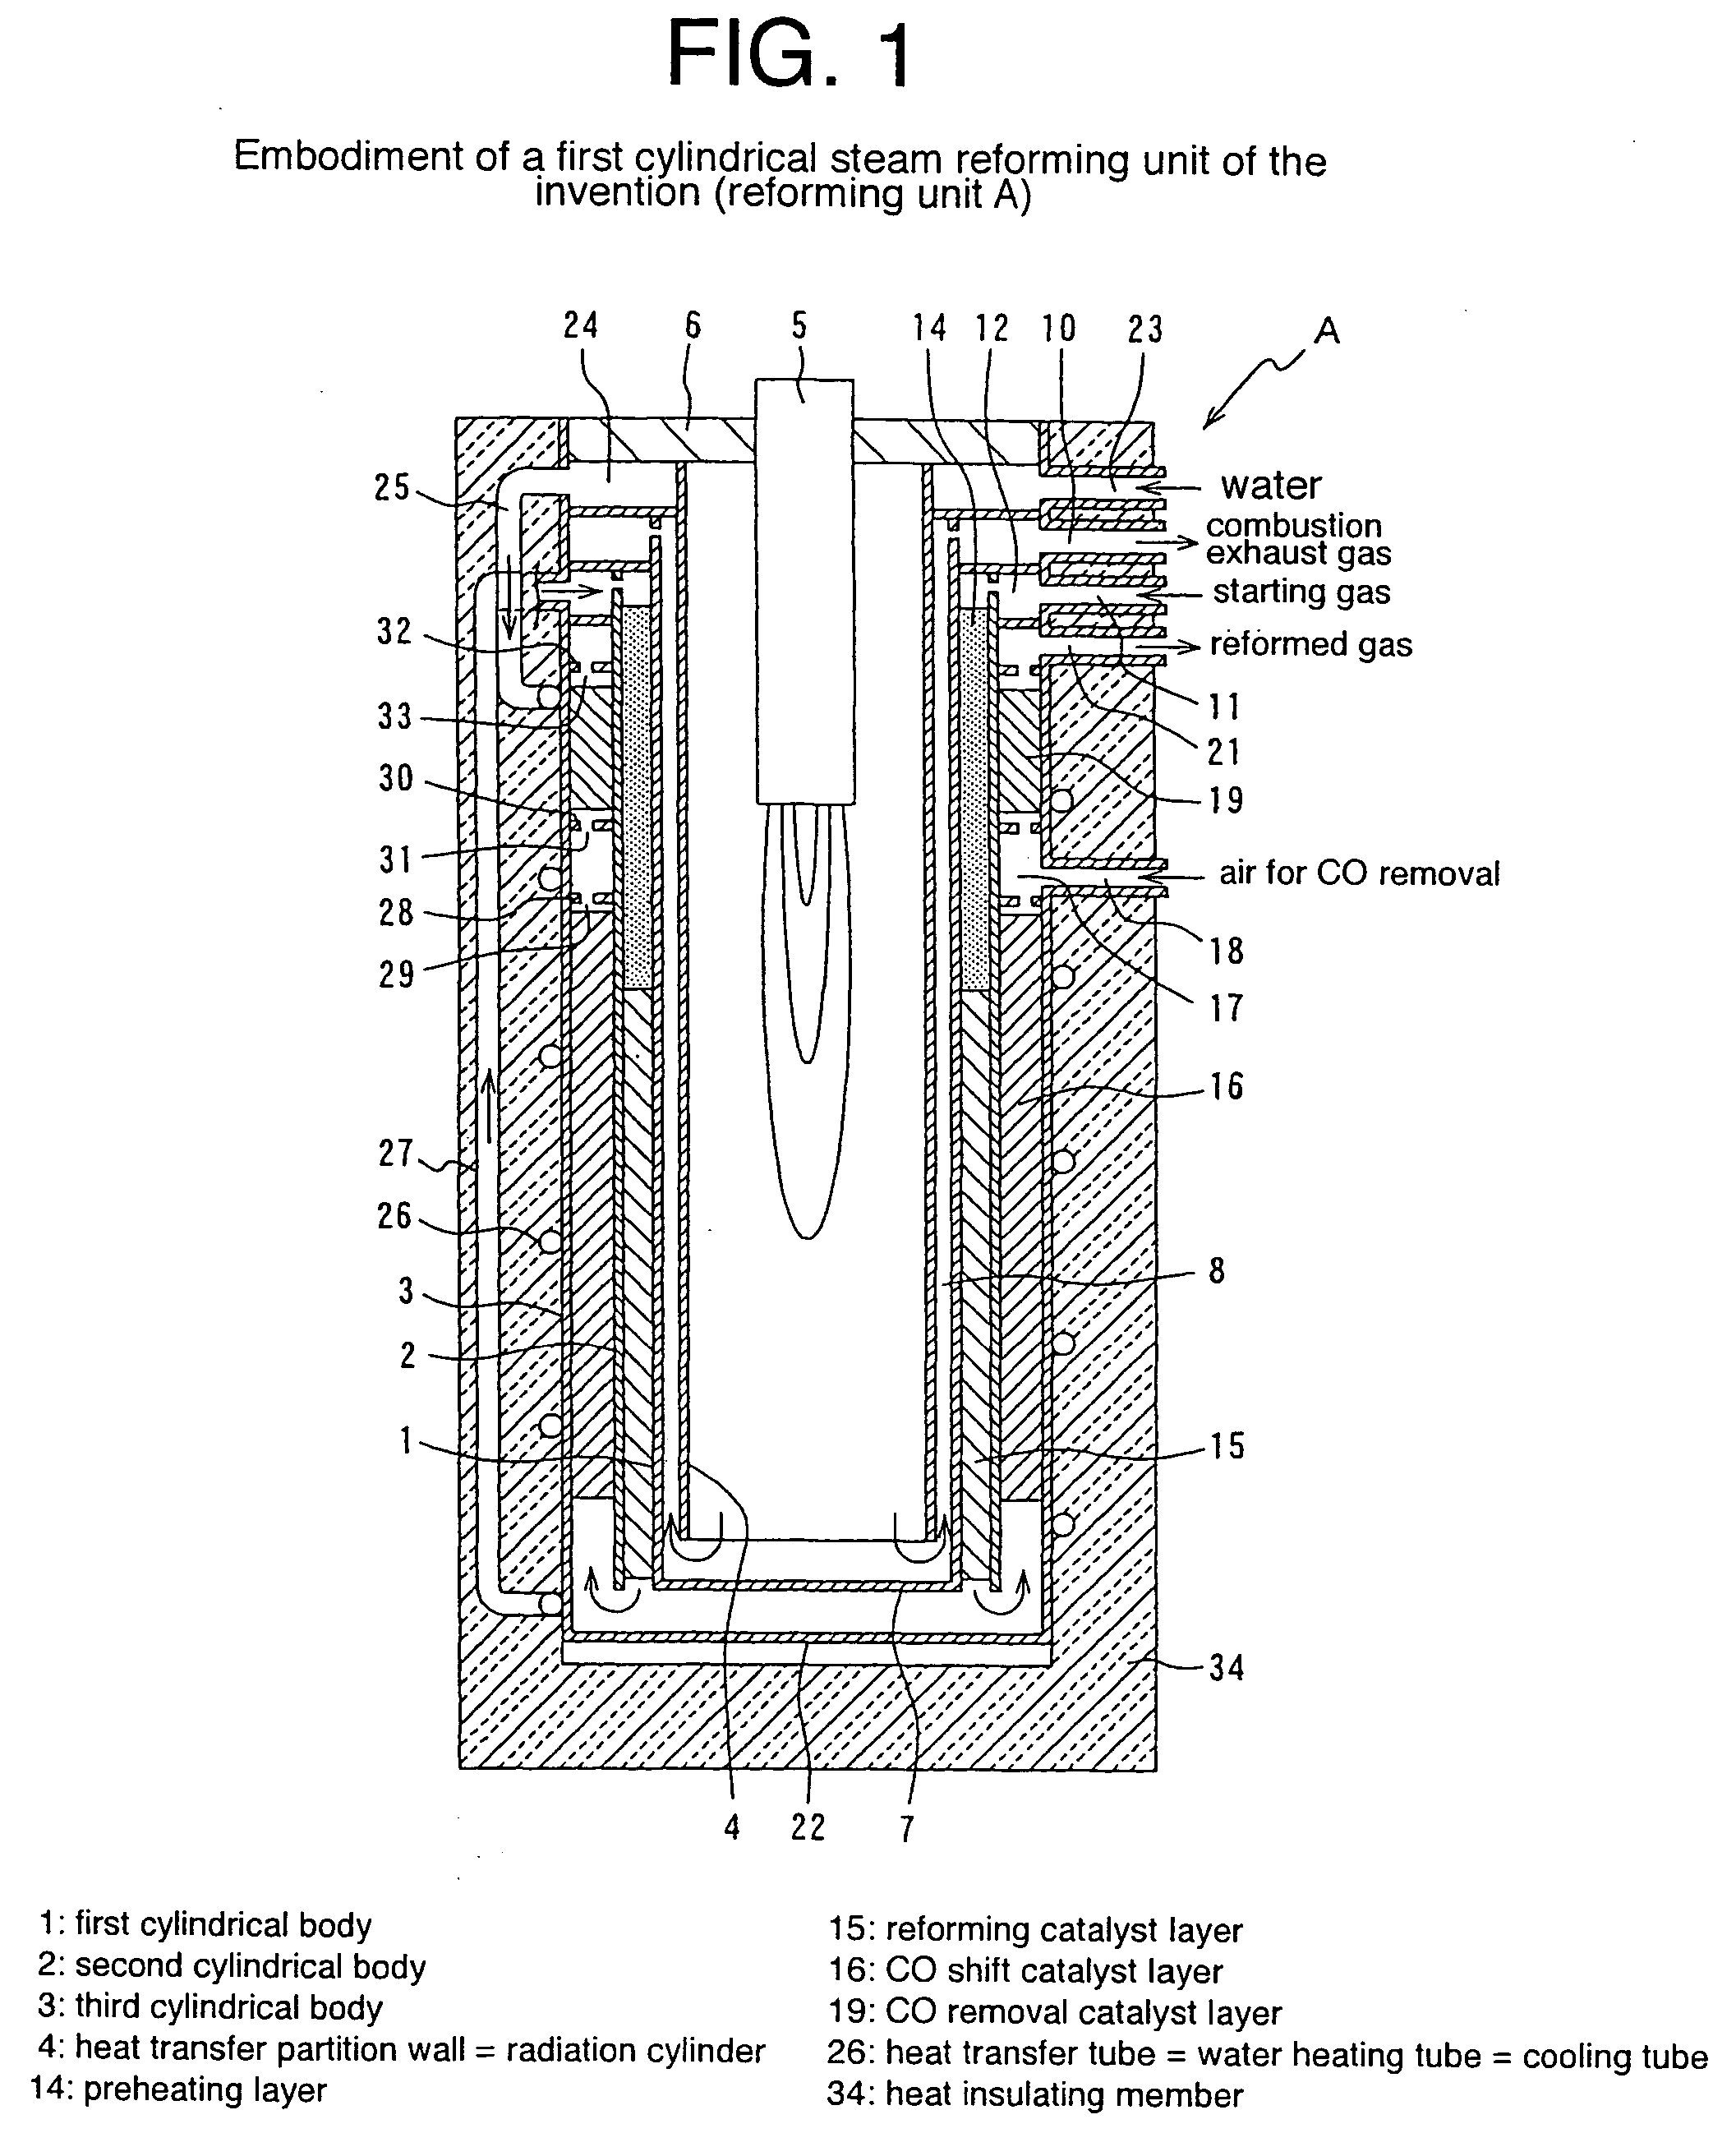 Cylindrical water vapor reforming unit